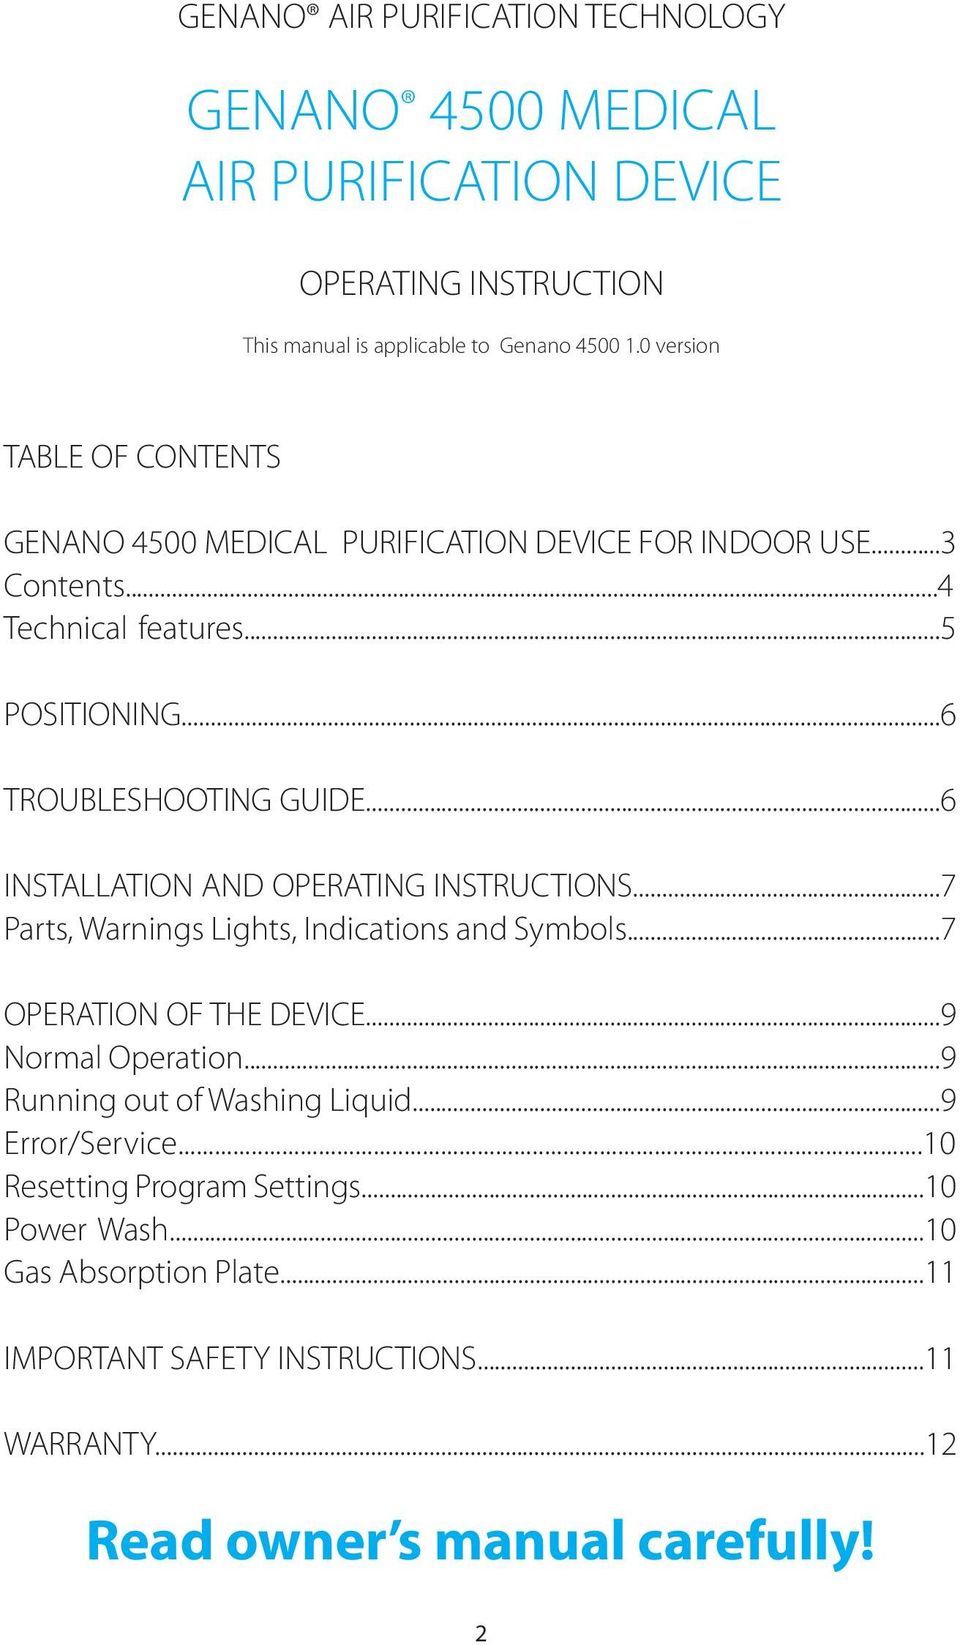 ..6 INSTALLATION AND OPERATING INSTRUCTIONS...7 Parts, Warnings Lights, Indications and Symbols...7 OPERATION OF THE DEVICE...9 Normal Operation.